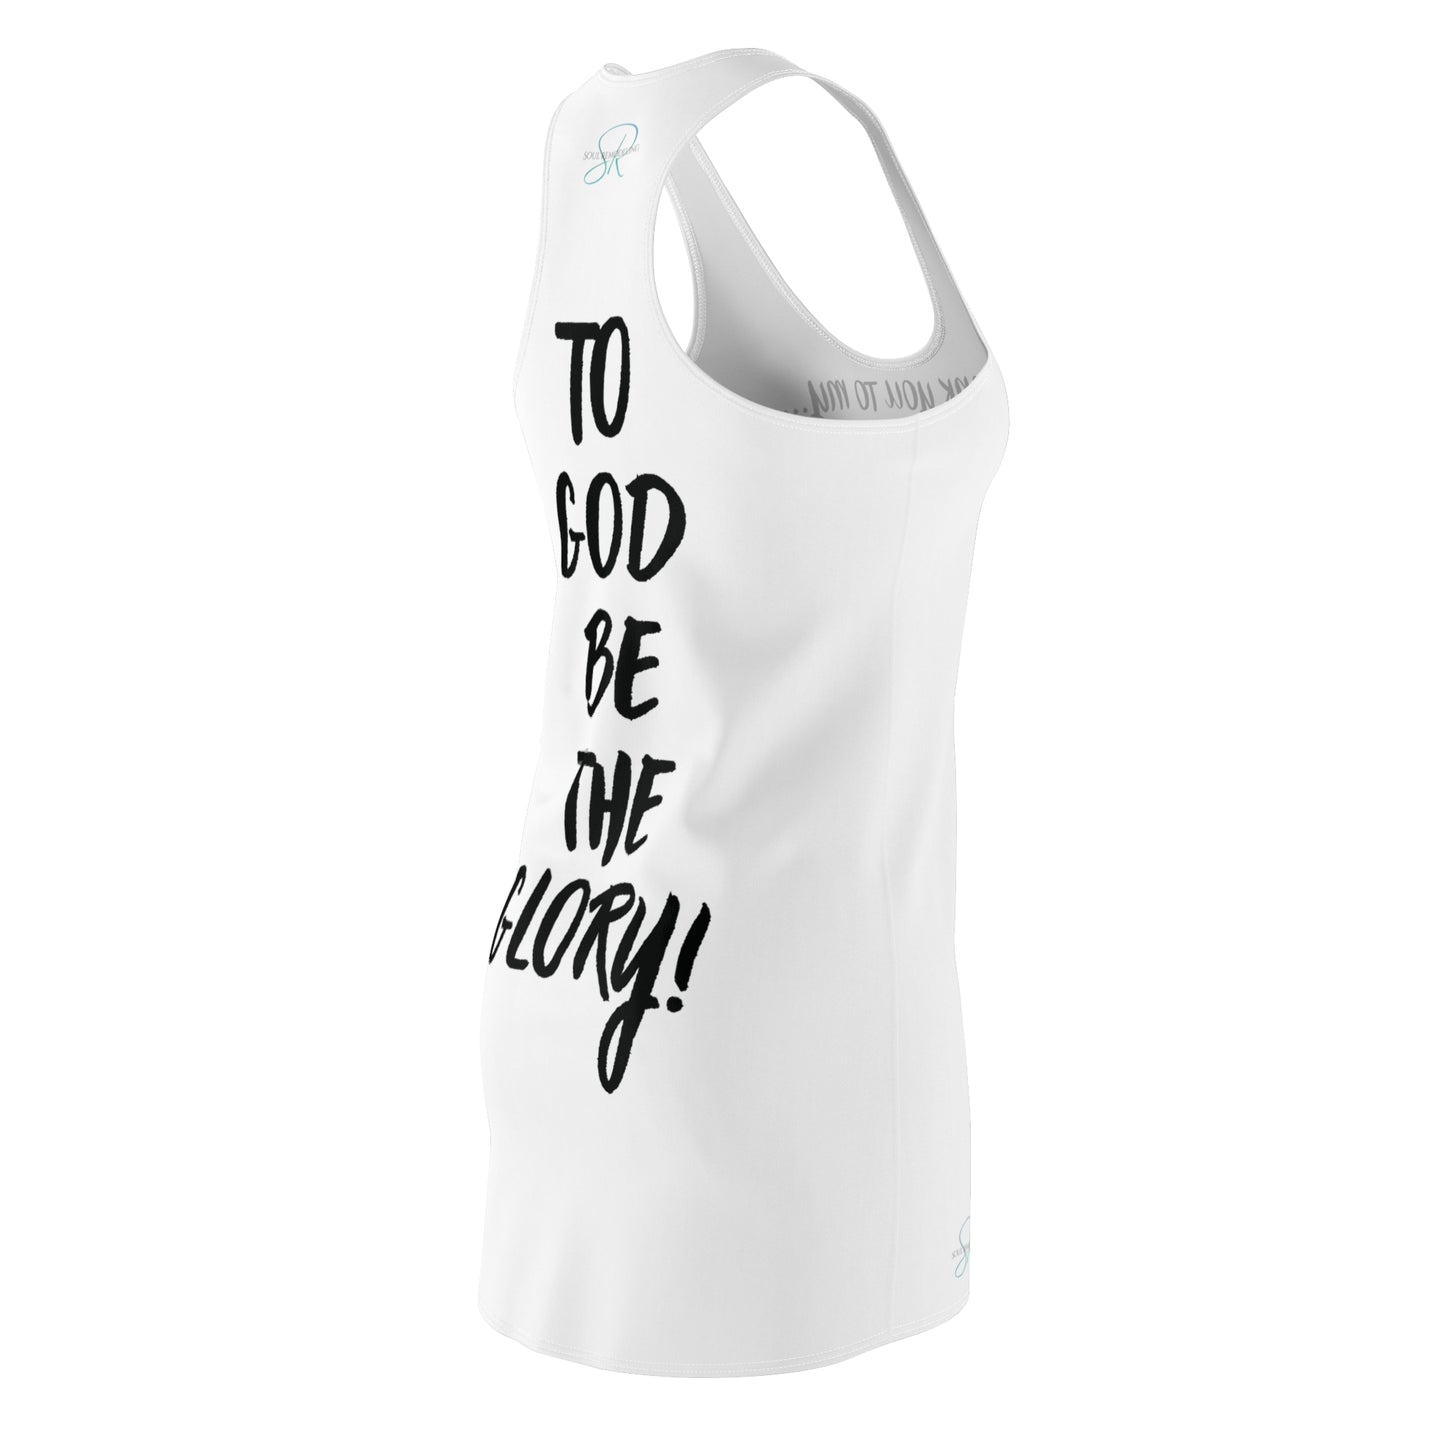 Dress "Thank You to My Body"